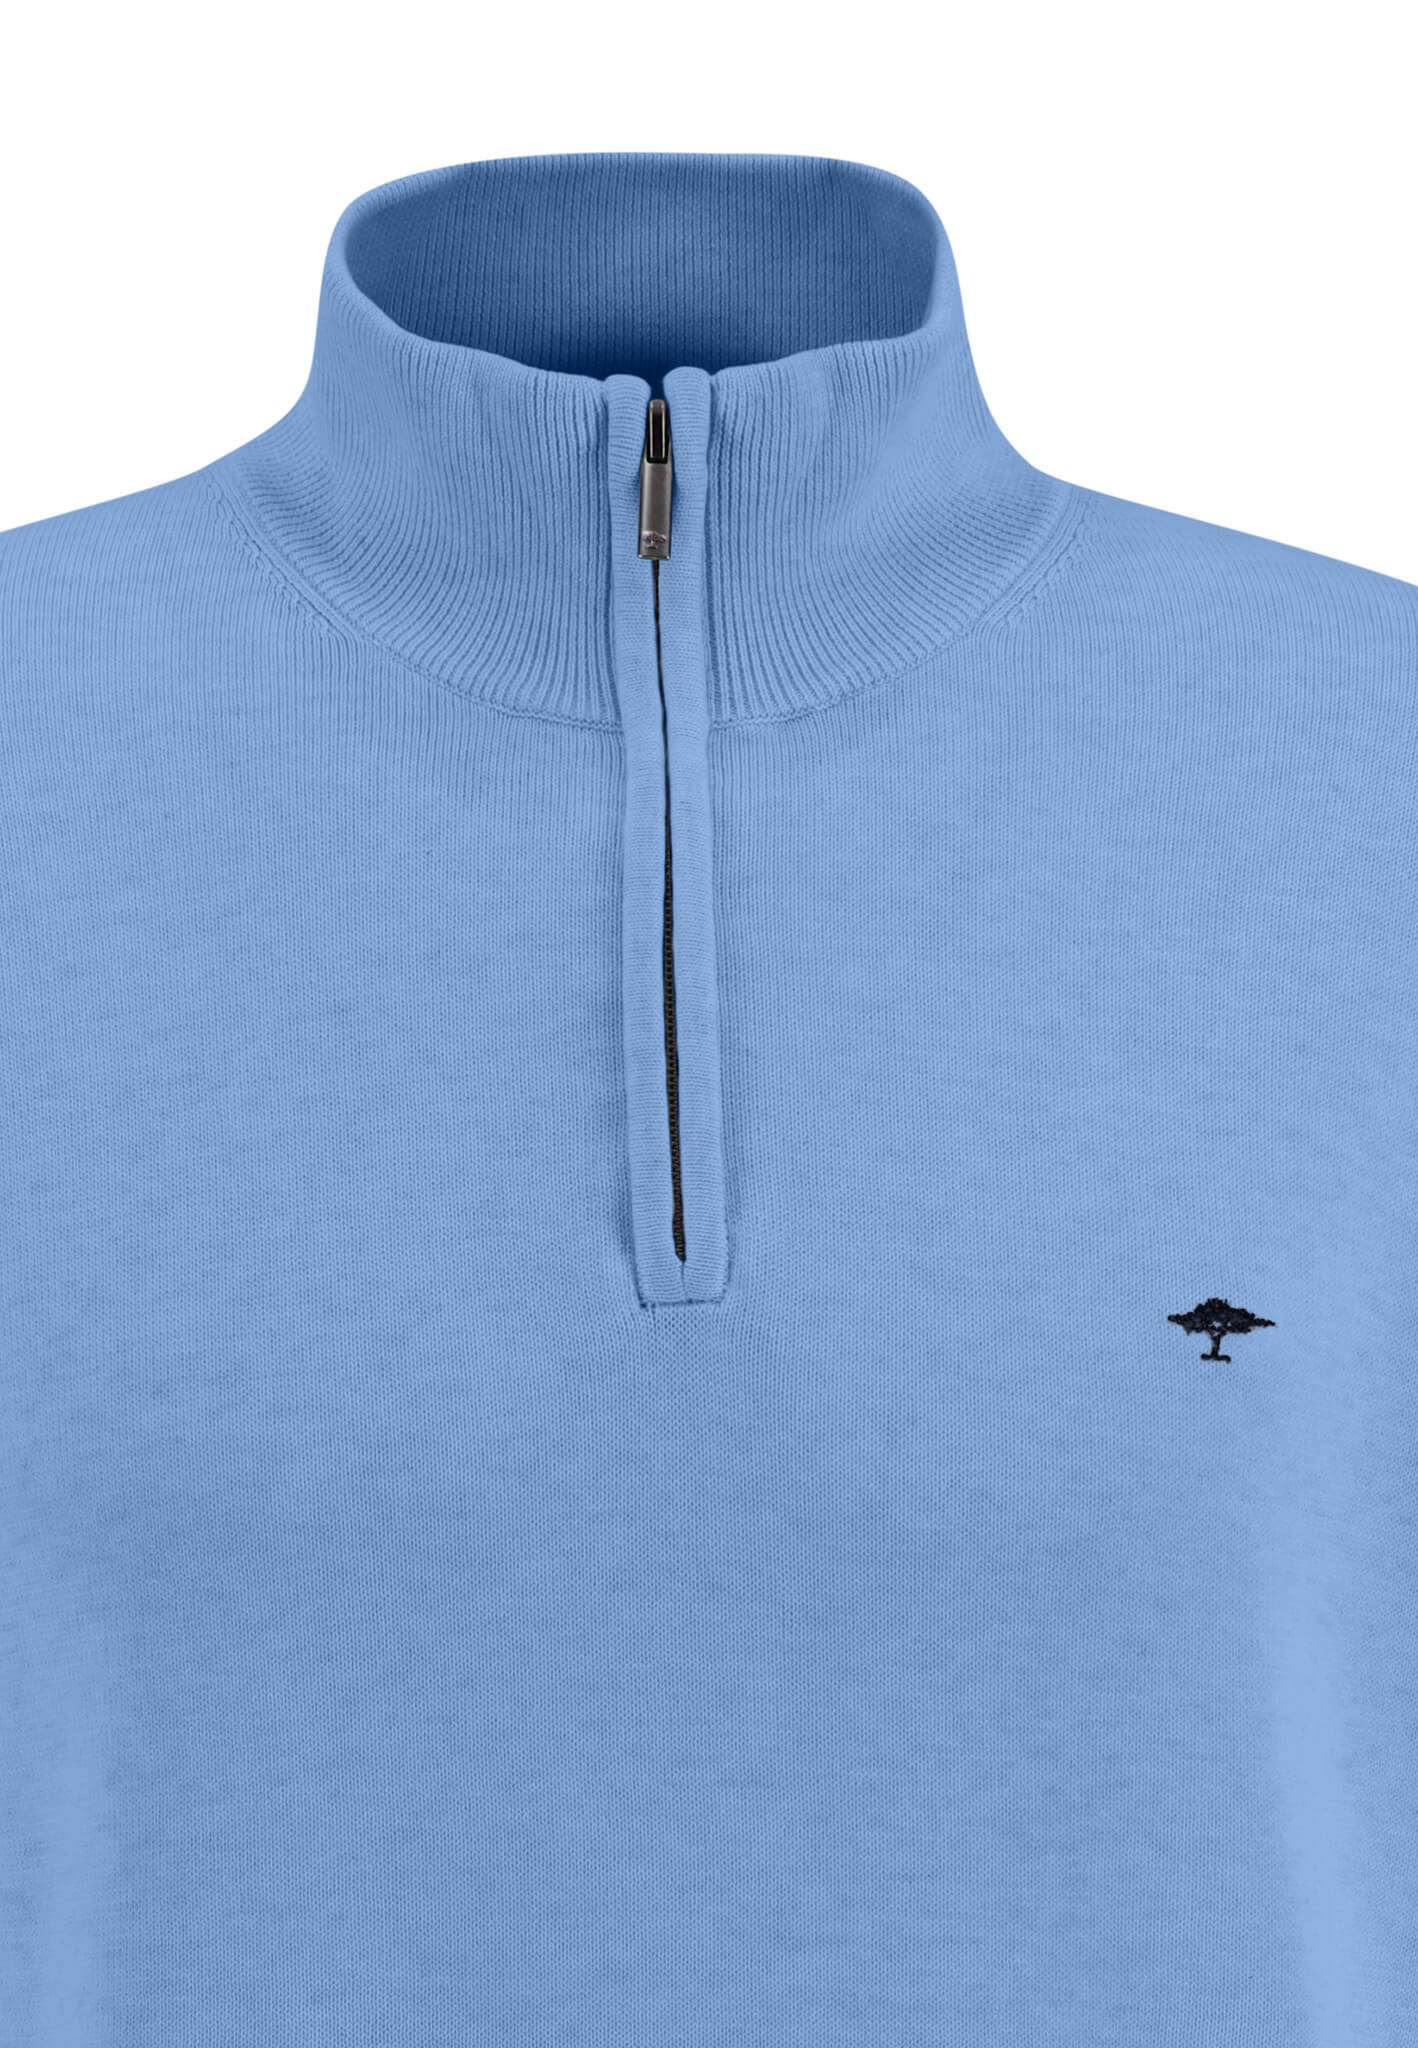 Fynch-Hatton Quarter Zip Supersoft Cotton Troyer Jumper - Light Sky cropped to show collar and zip